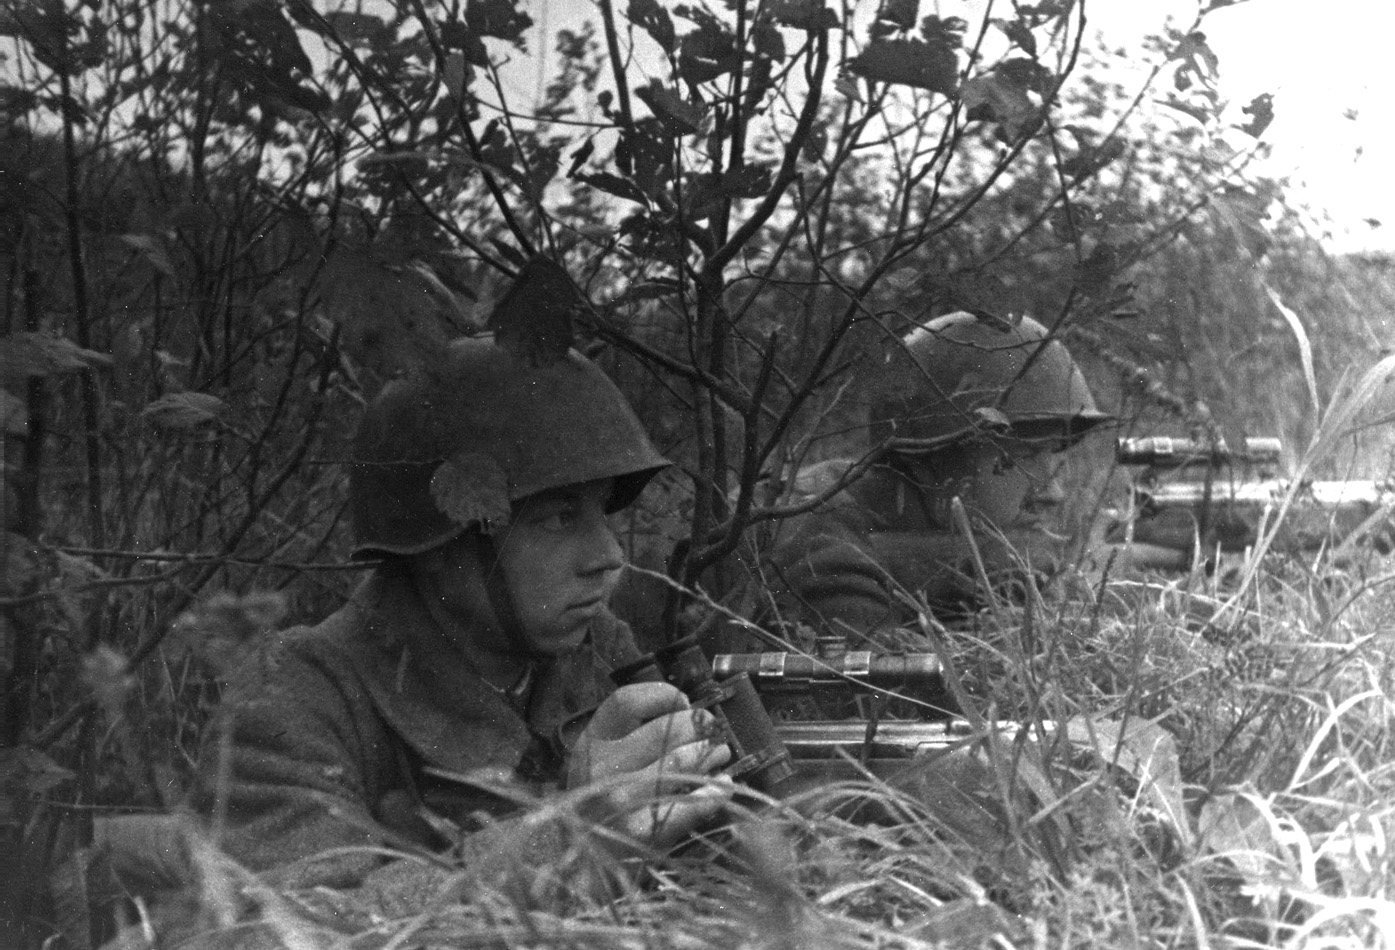 Sergeant Mikhail Markovichenko and his student Nikolai Sefin use a barricade of downed trees as a sniper’s nest and keep a sharp eye out for movement to their front.